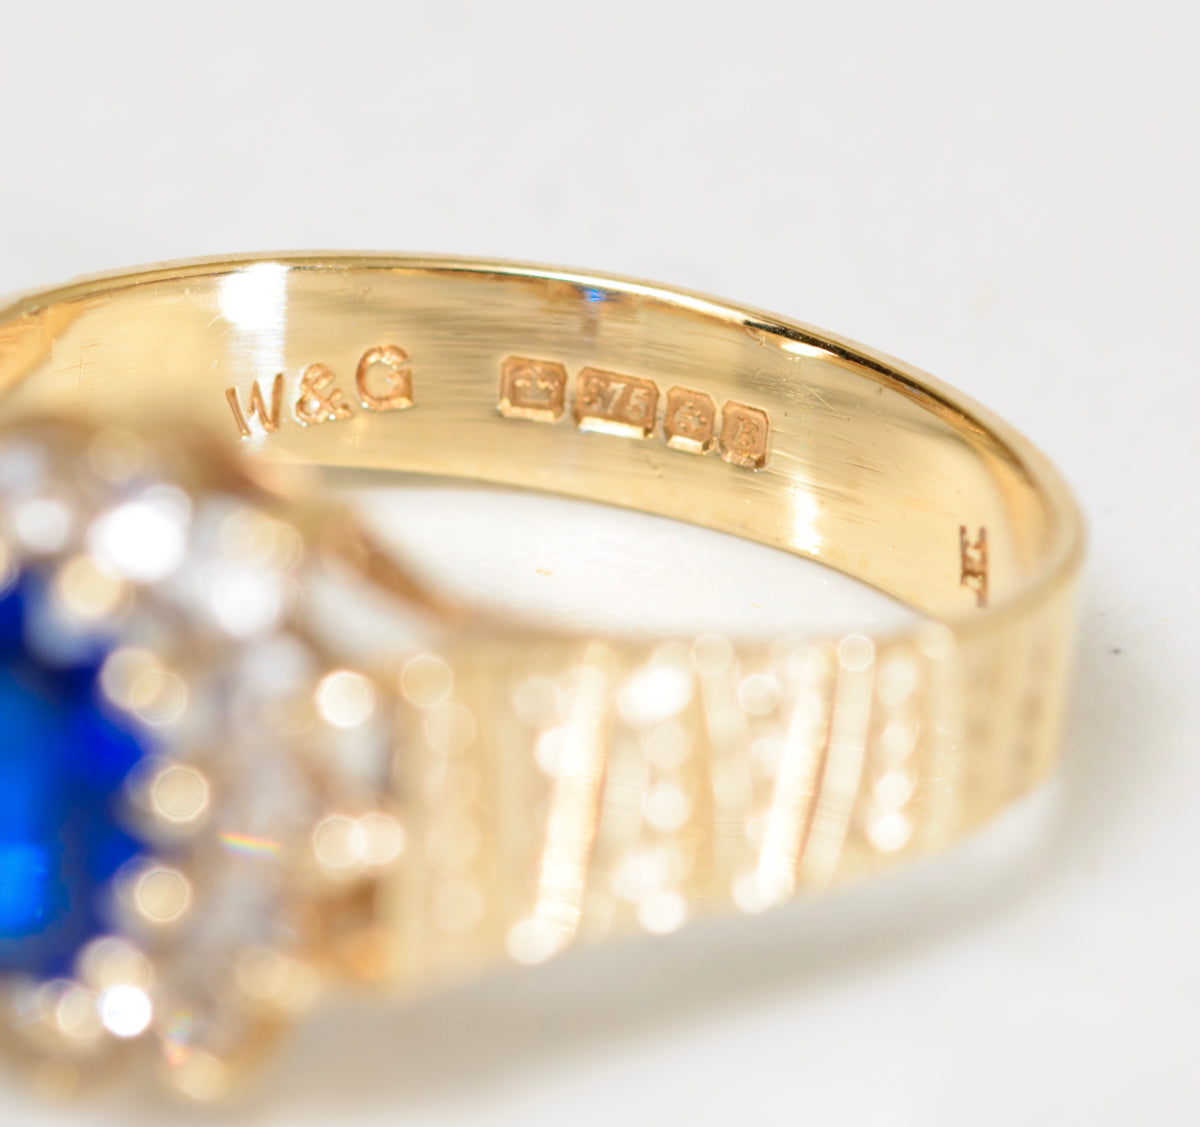 Retro 1970's 9ct Gold Halo Ring With Intense Blue Spinel (Lab Created) (A1775)